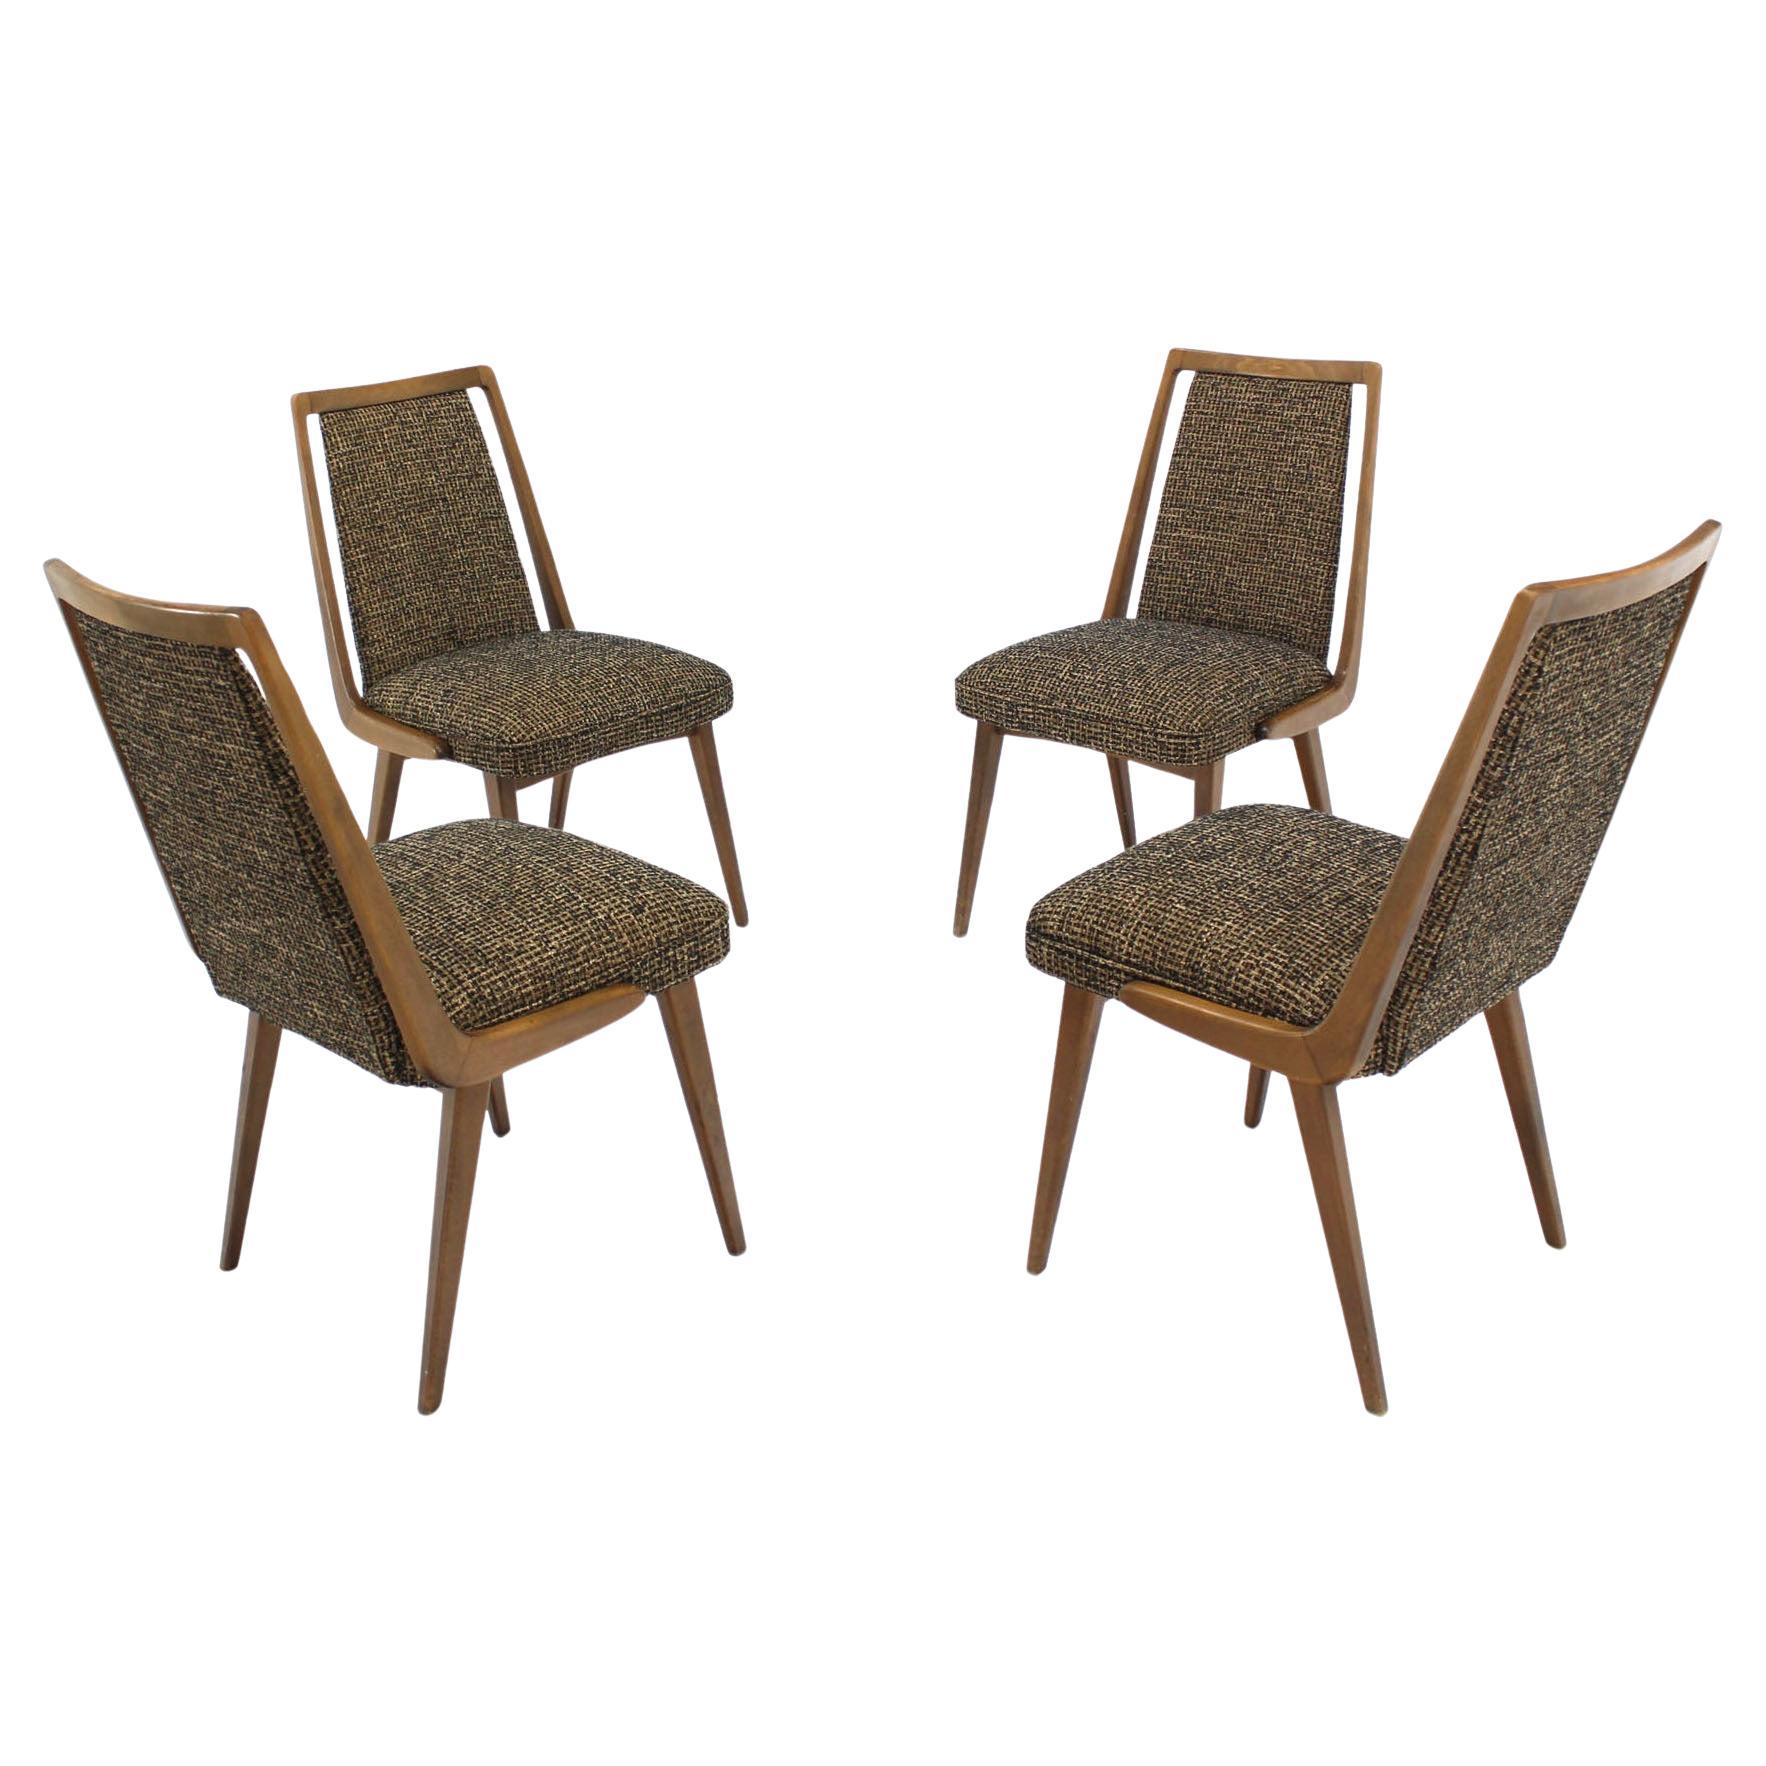 Set of Four Mid-Century Modern Blond Wood Side Dining Chairs New Upholstery MINT For Sale